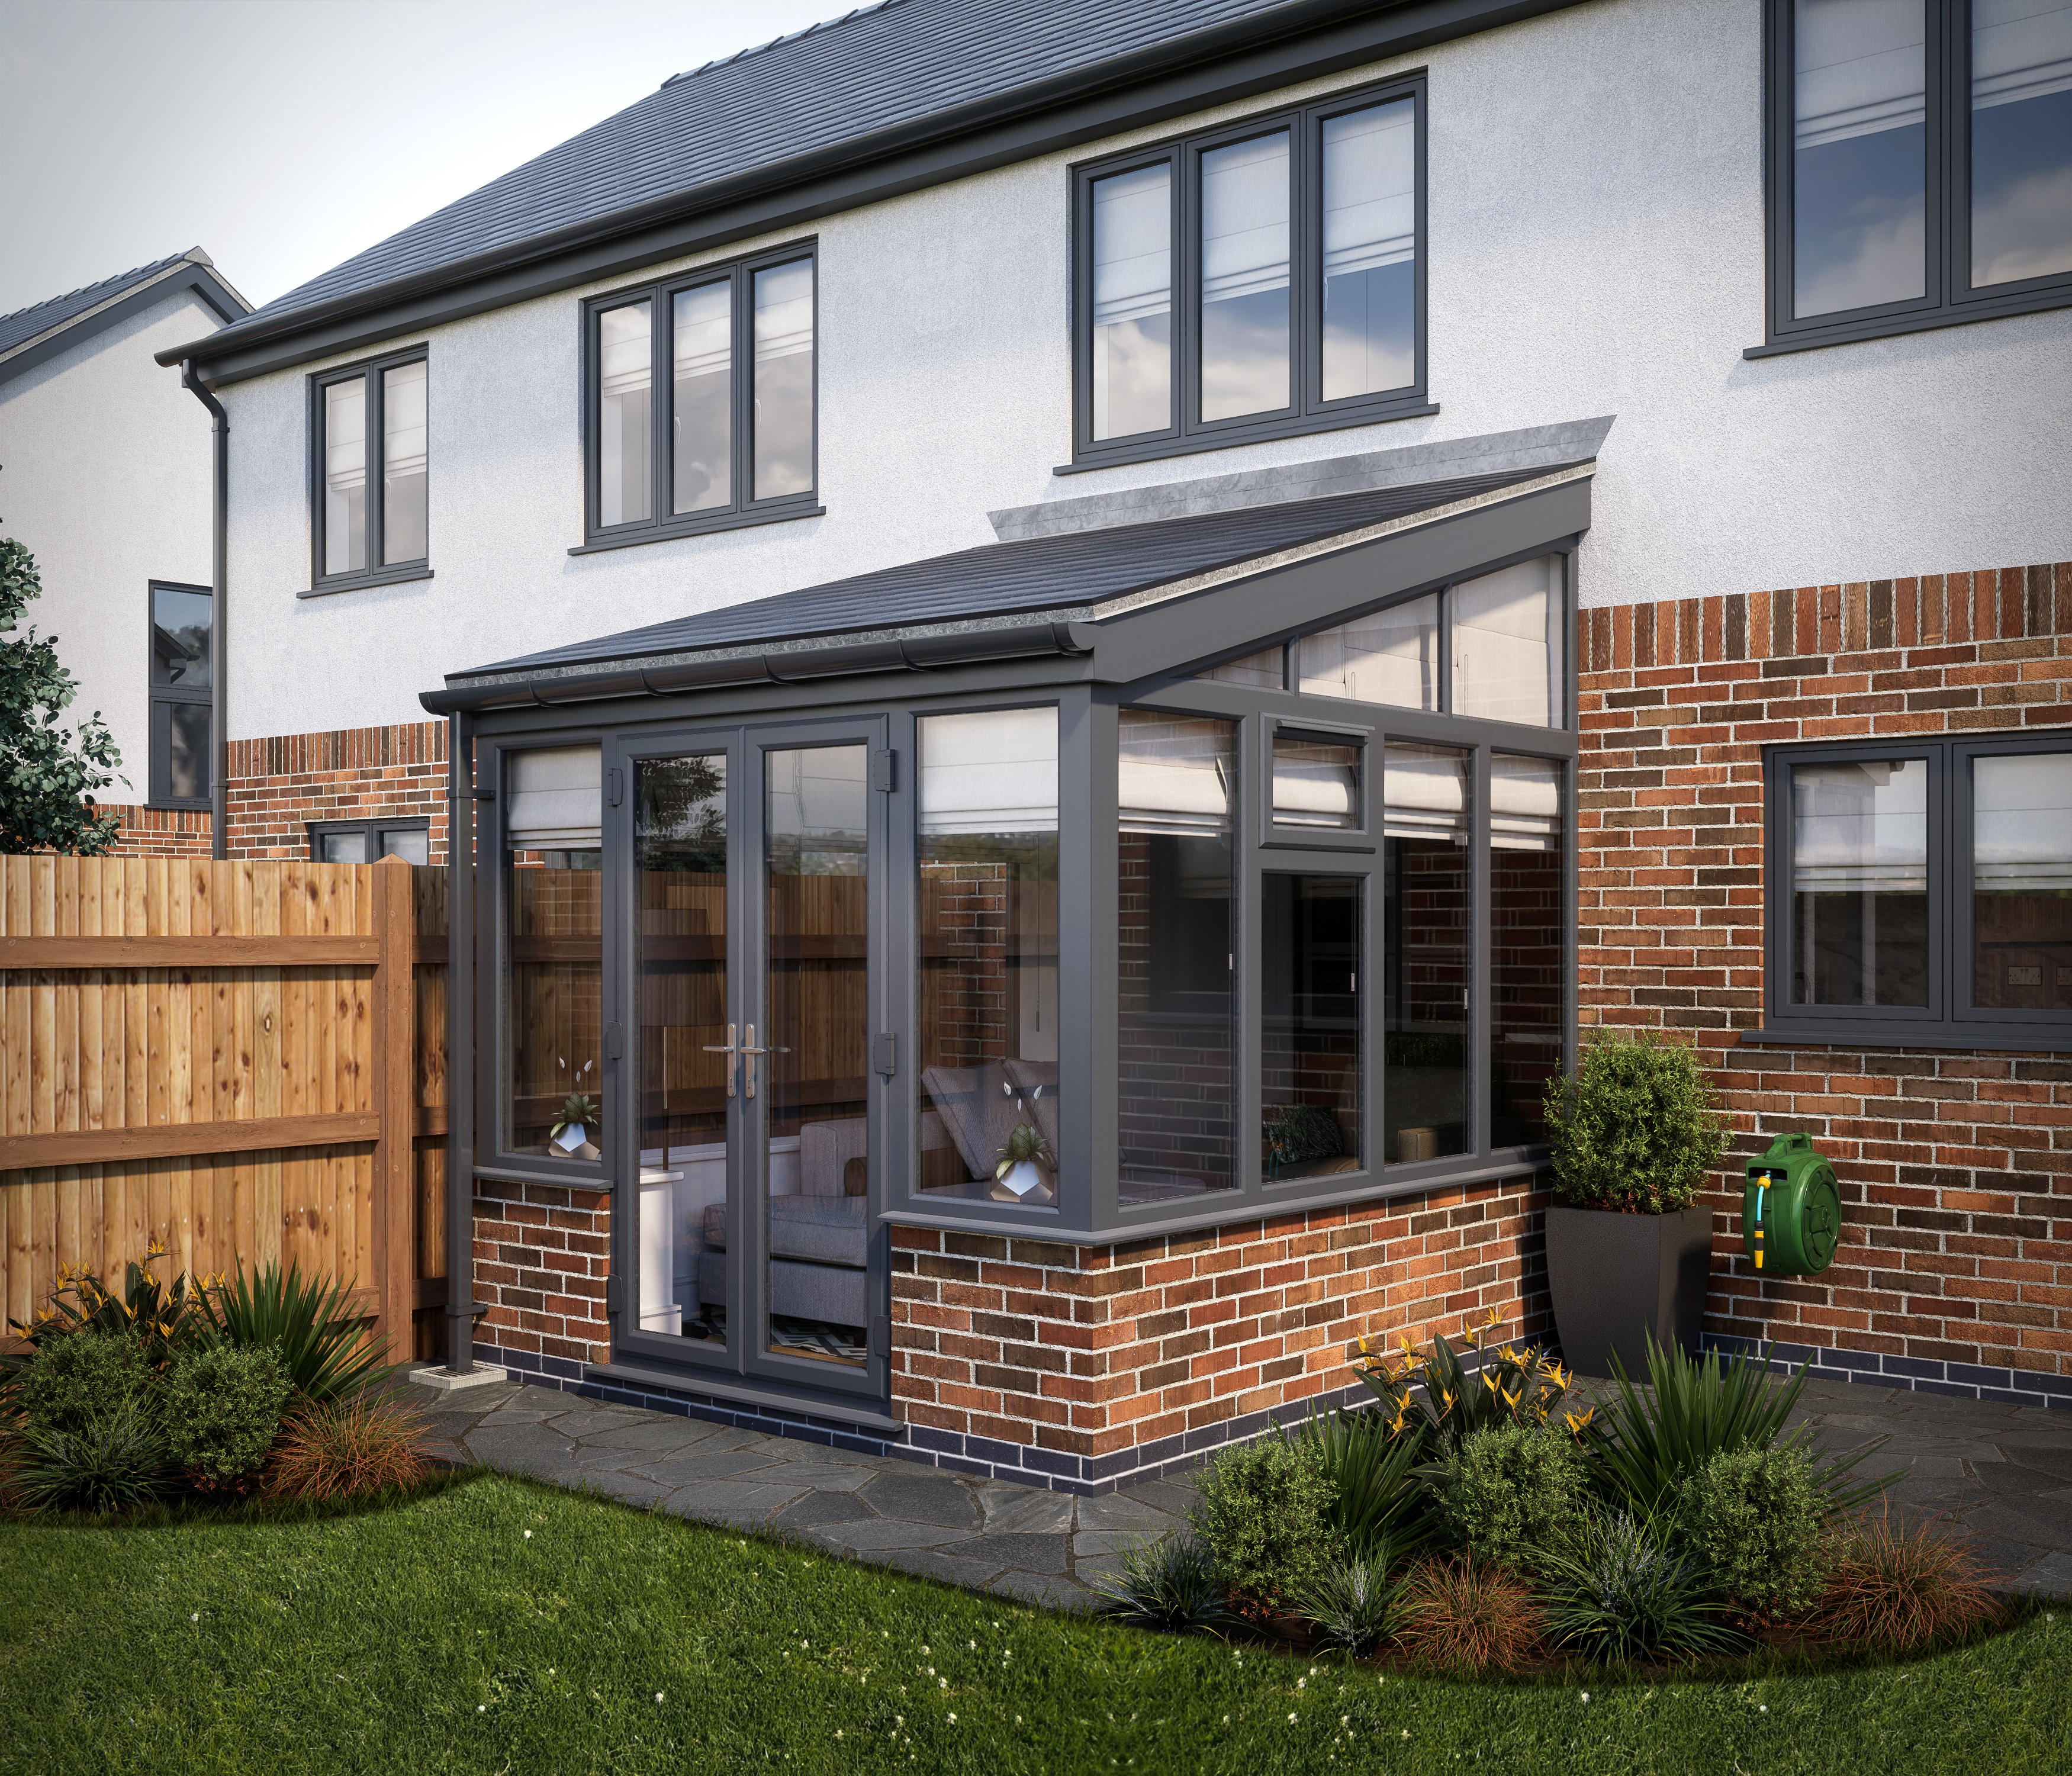 Image of SOLid Roof Lean to Conservatory Grey Frames Dwarf Wall with Titanium Grey Tiles - 10 x 10ft